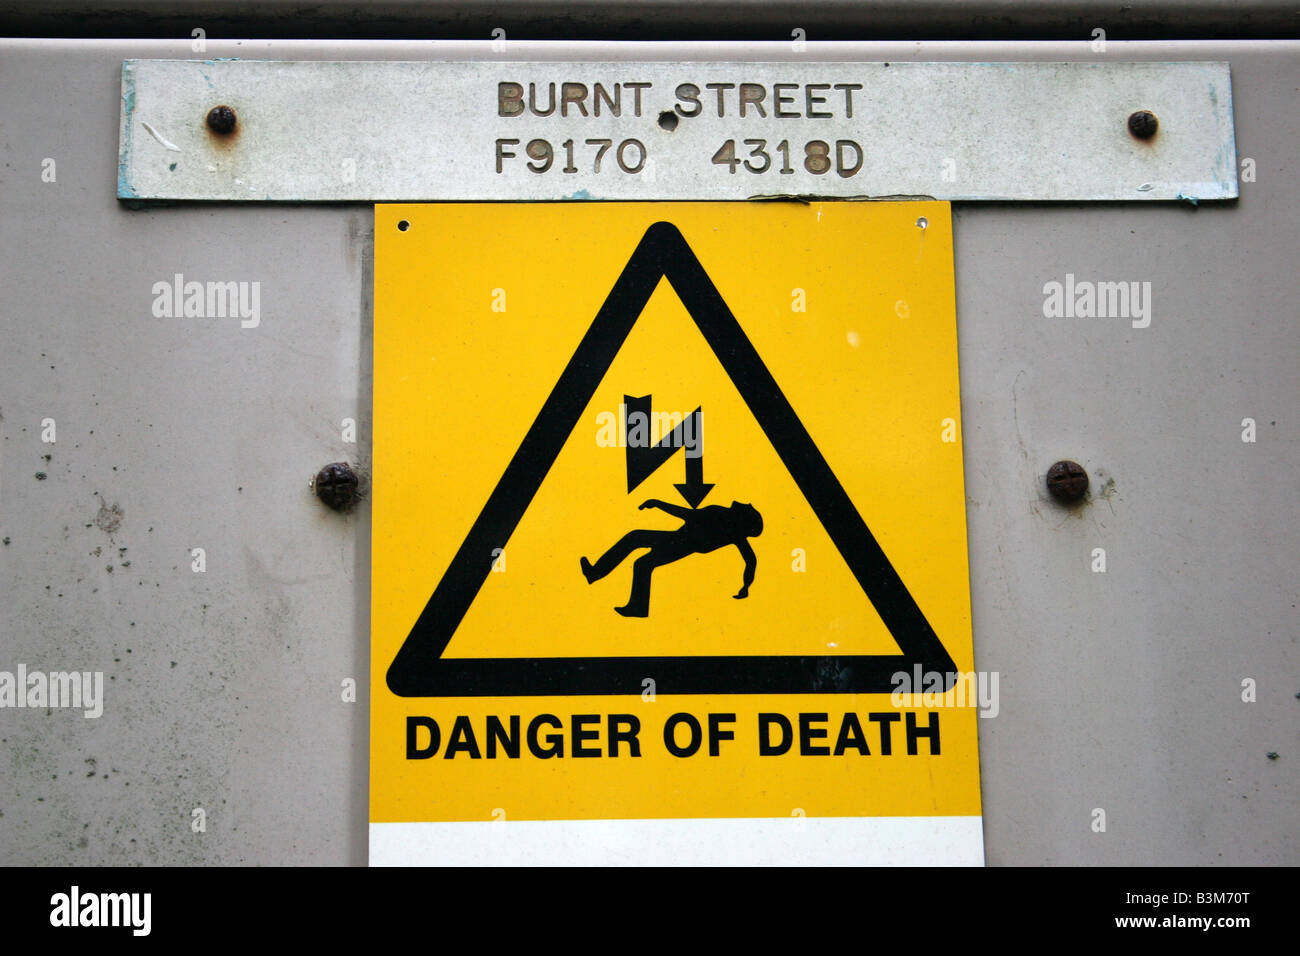 Danger of Death sign at Burnt Street Stock Photo